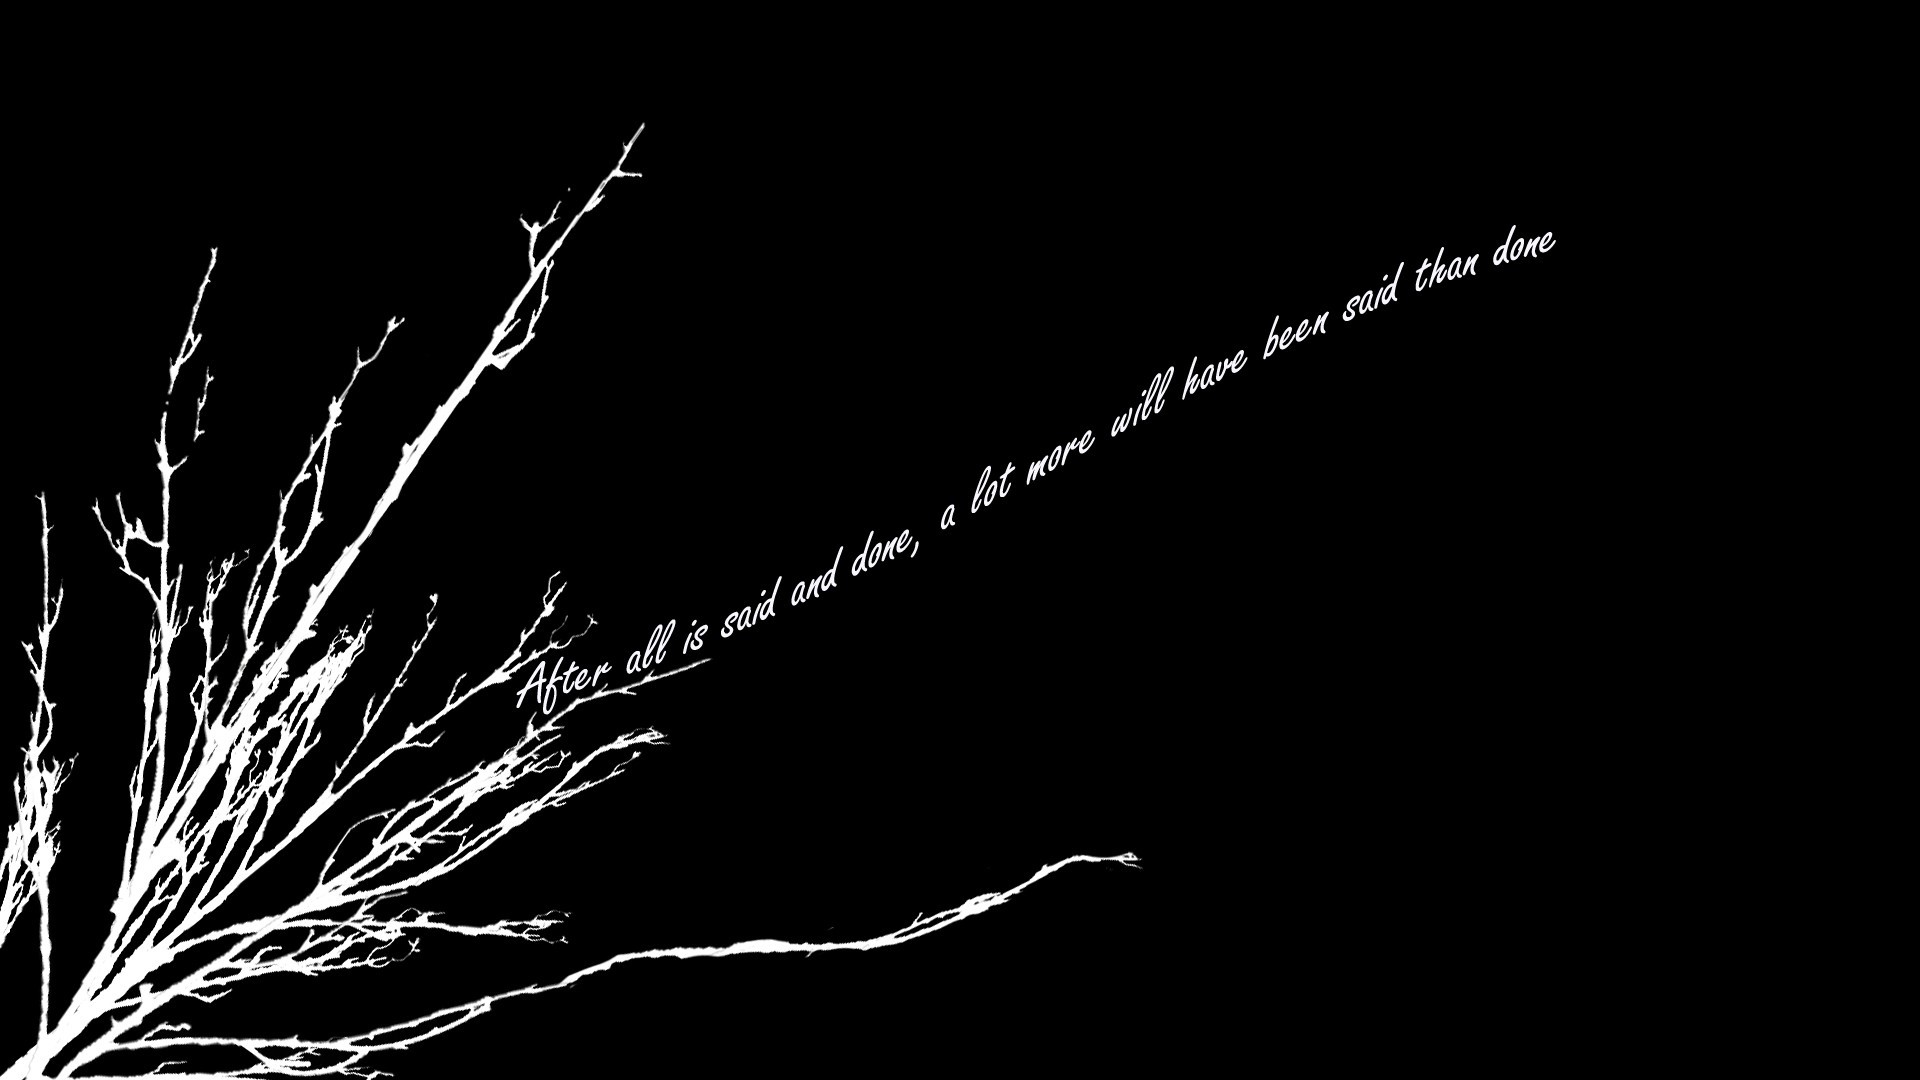 Nice Quote In Black Background Image